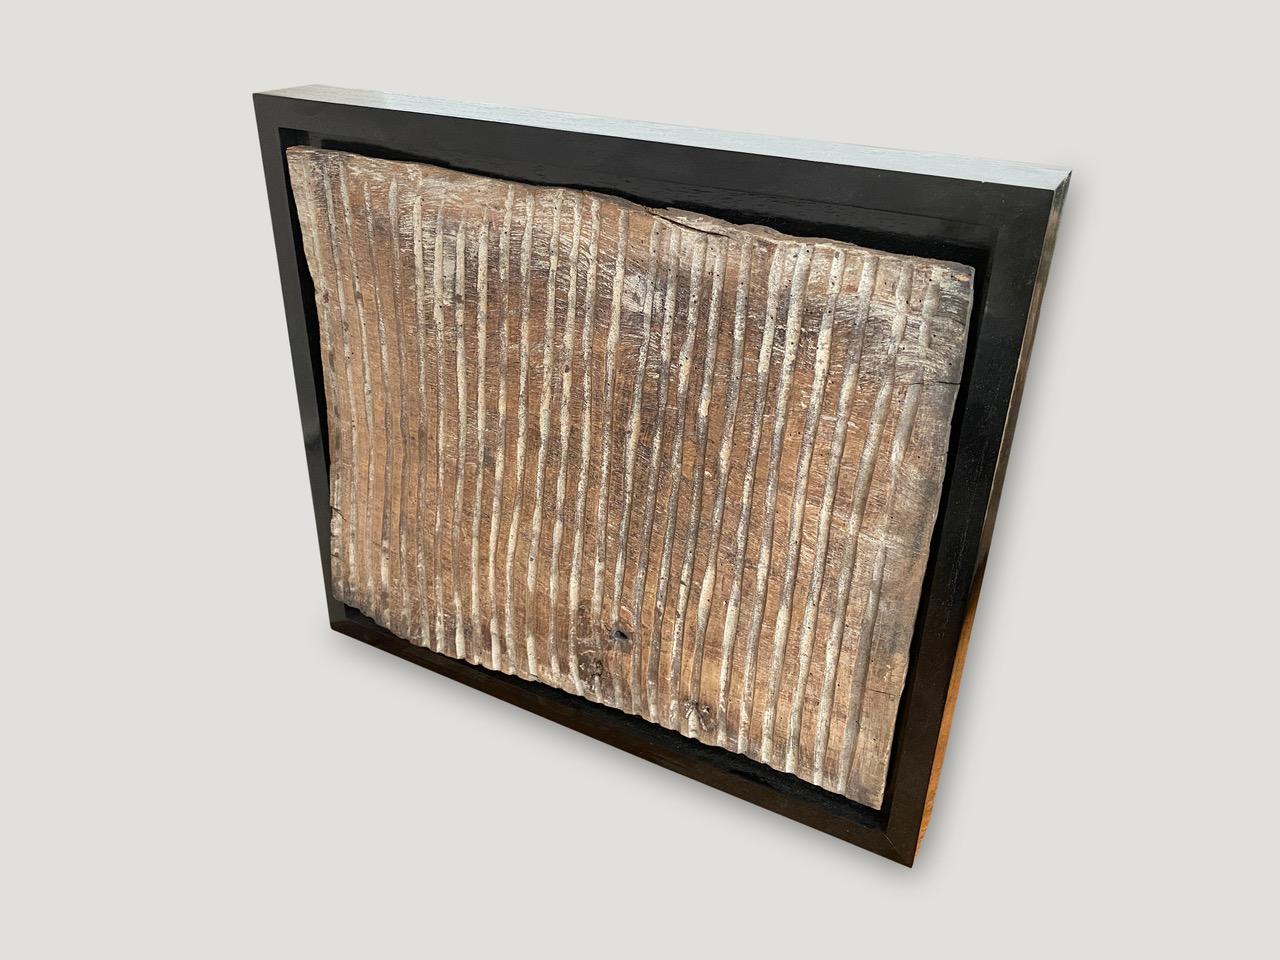 Antique hand carved panel from Toraja. Framed in a Minimalist black teak wood shadow box. This carving symbolizes the protection of the home. Great art piece.

This antique carving was sourced in the spirit of wabi-sabi, a Japanese philosophy that